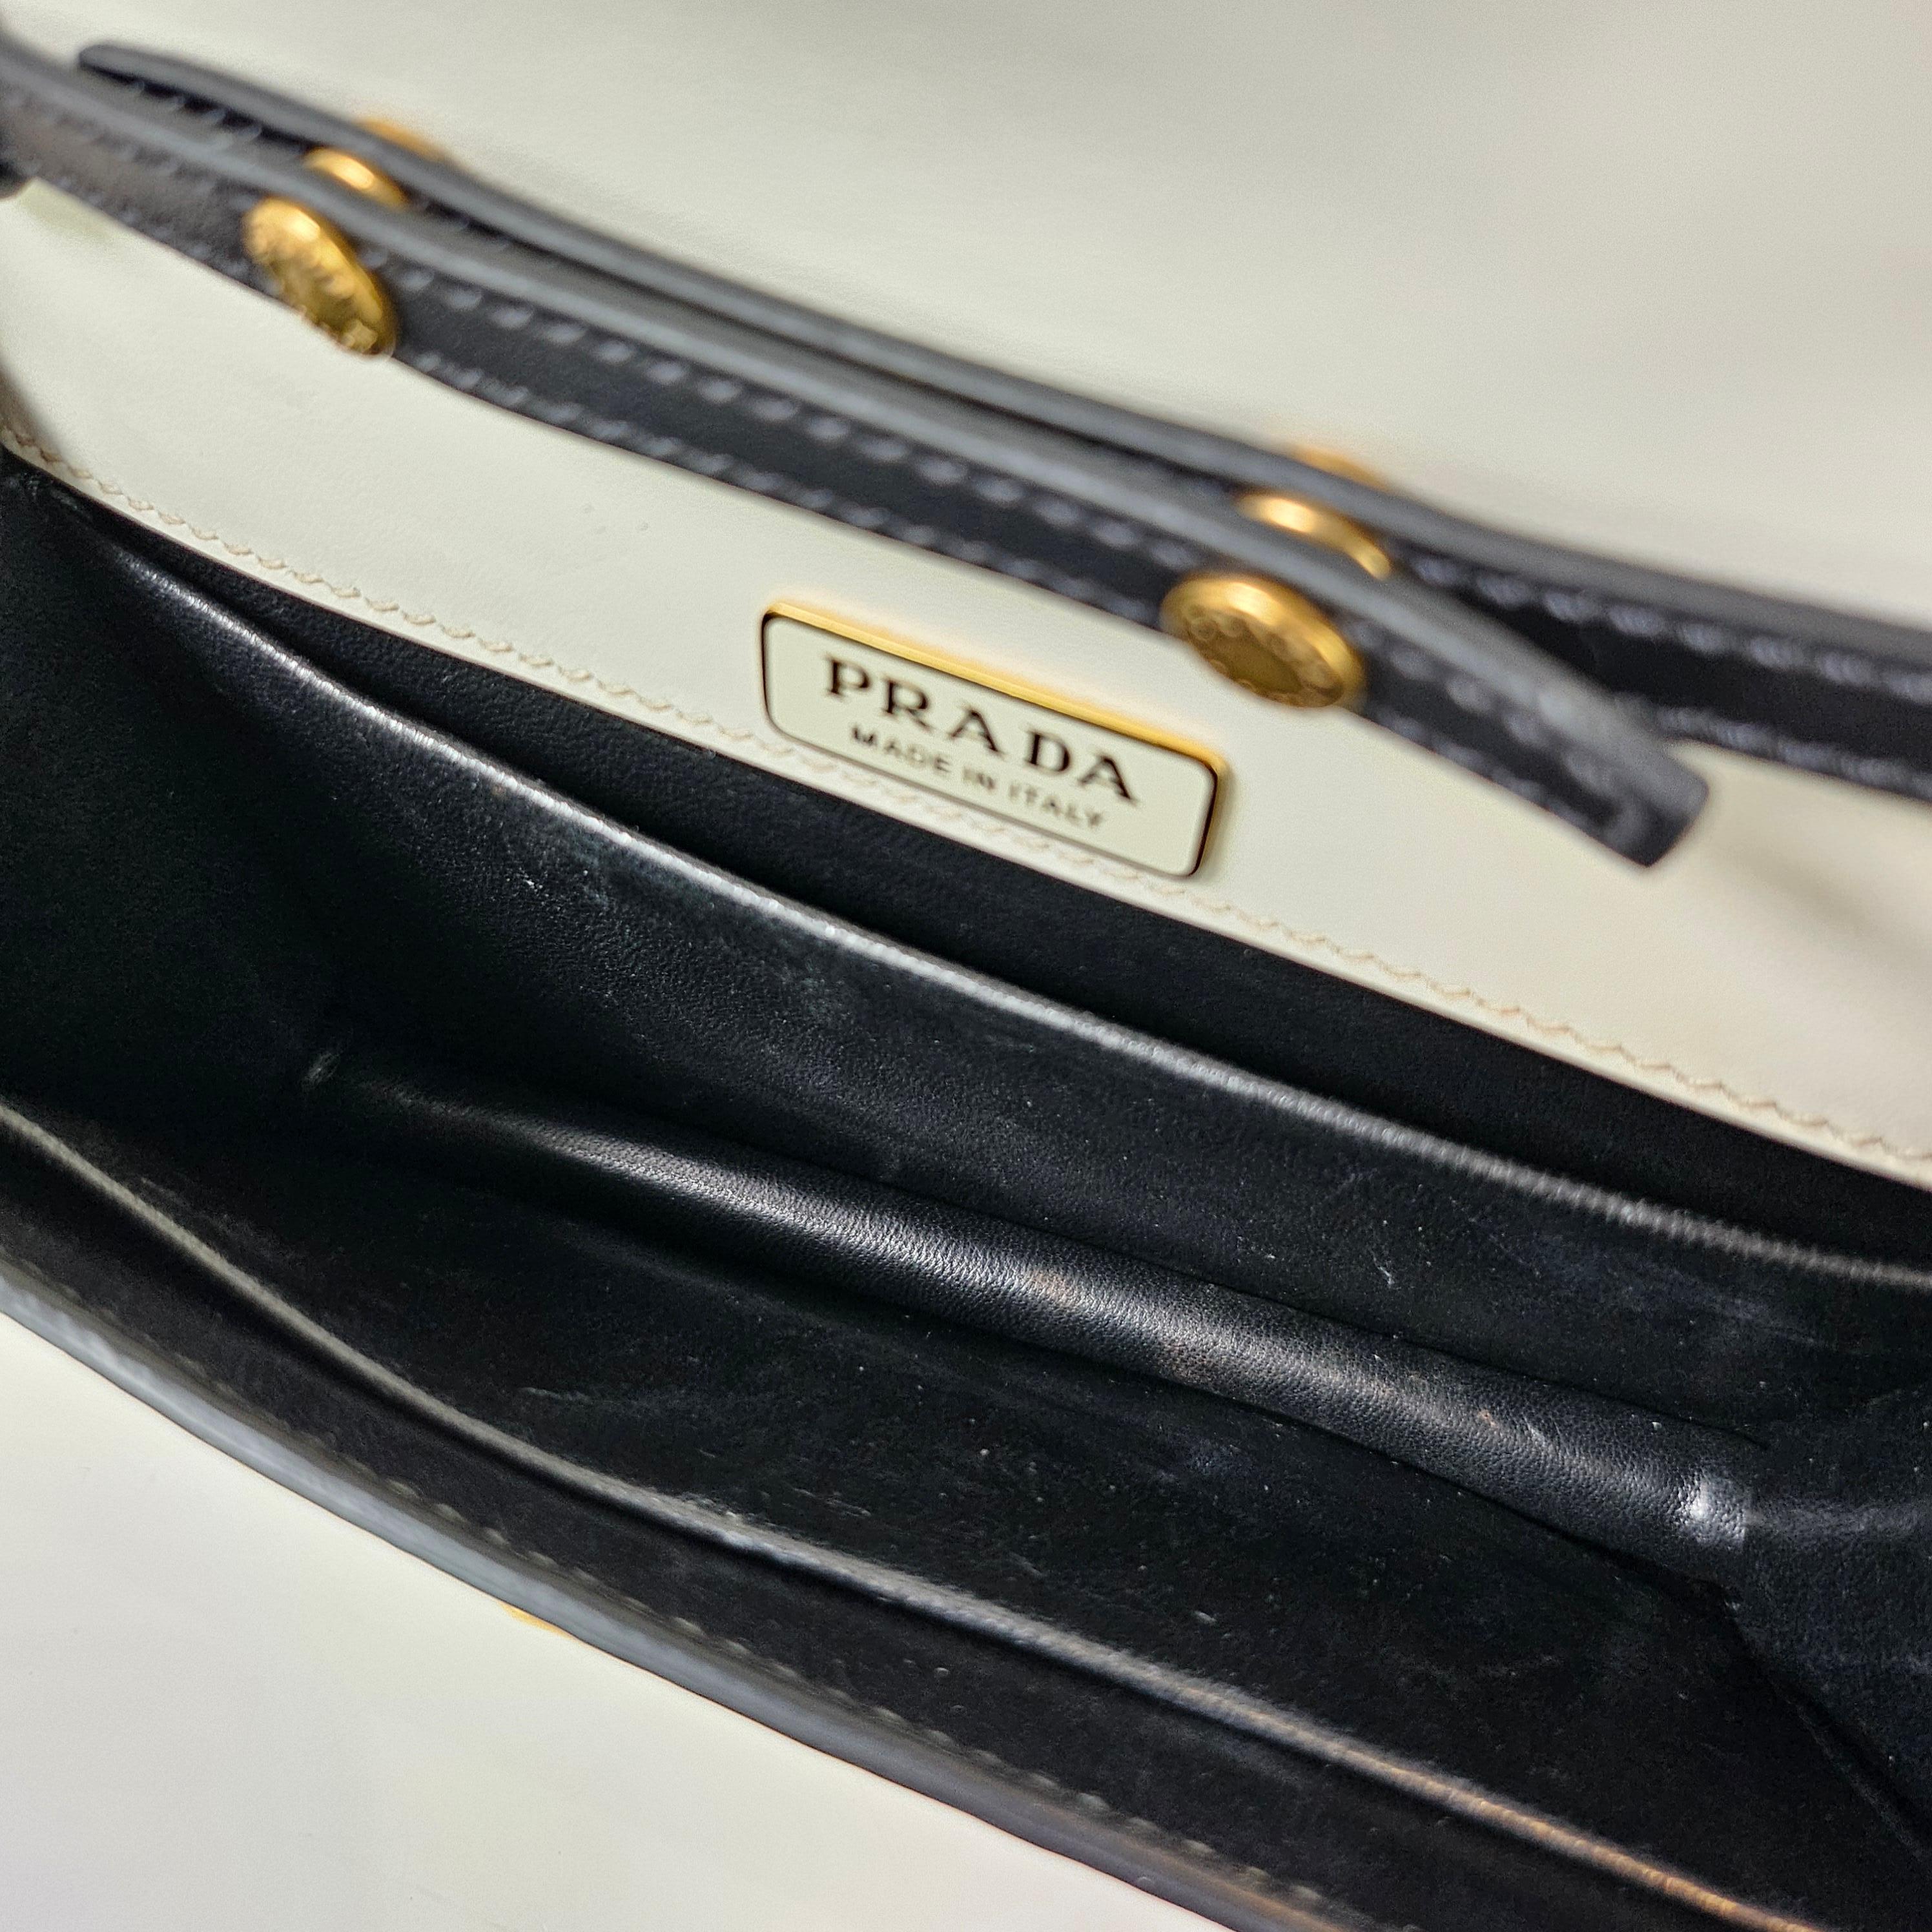 Condition: This authentic Prada bag is in great pre-loved condition. There are scratches/tarnishing to hardware and scratches in the interior. Faint wear to glazing on side opening and minor discoloration under flap.

Est. Retail: $3000

Includes: